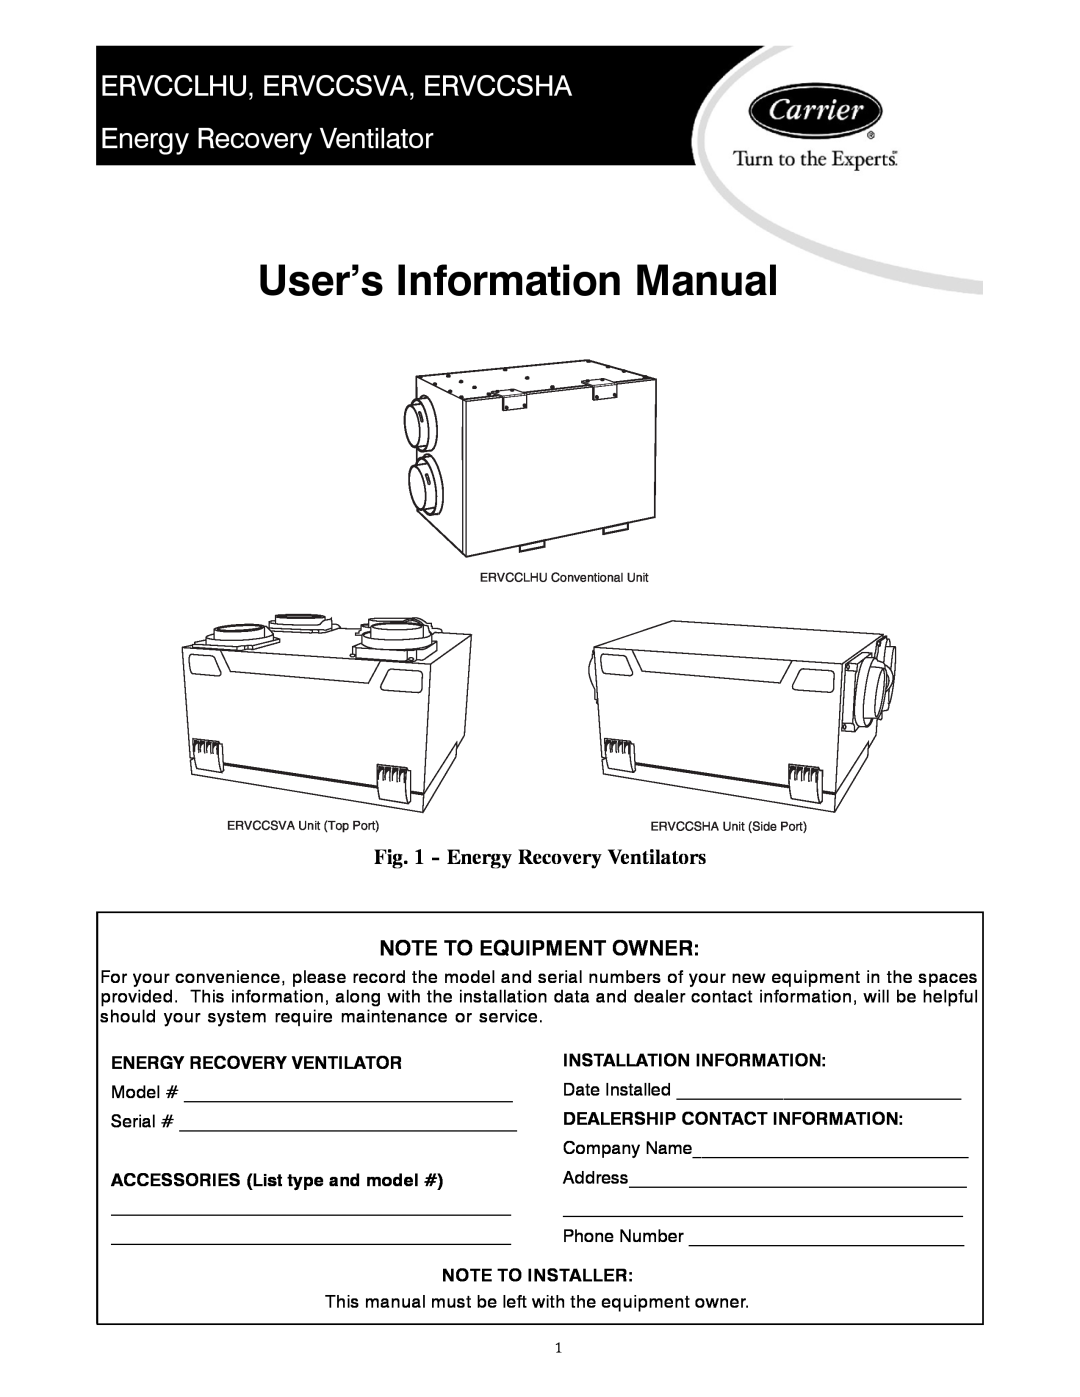 Carrier ERVCCLHU manual Energy Recovery Ventilators, User’s Information Manual, Note To Equipment Owner, Note To Installer 